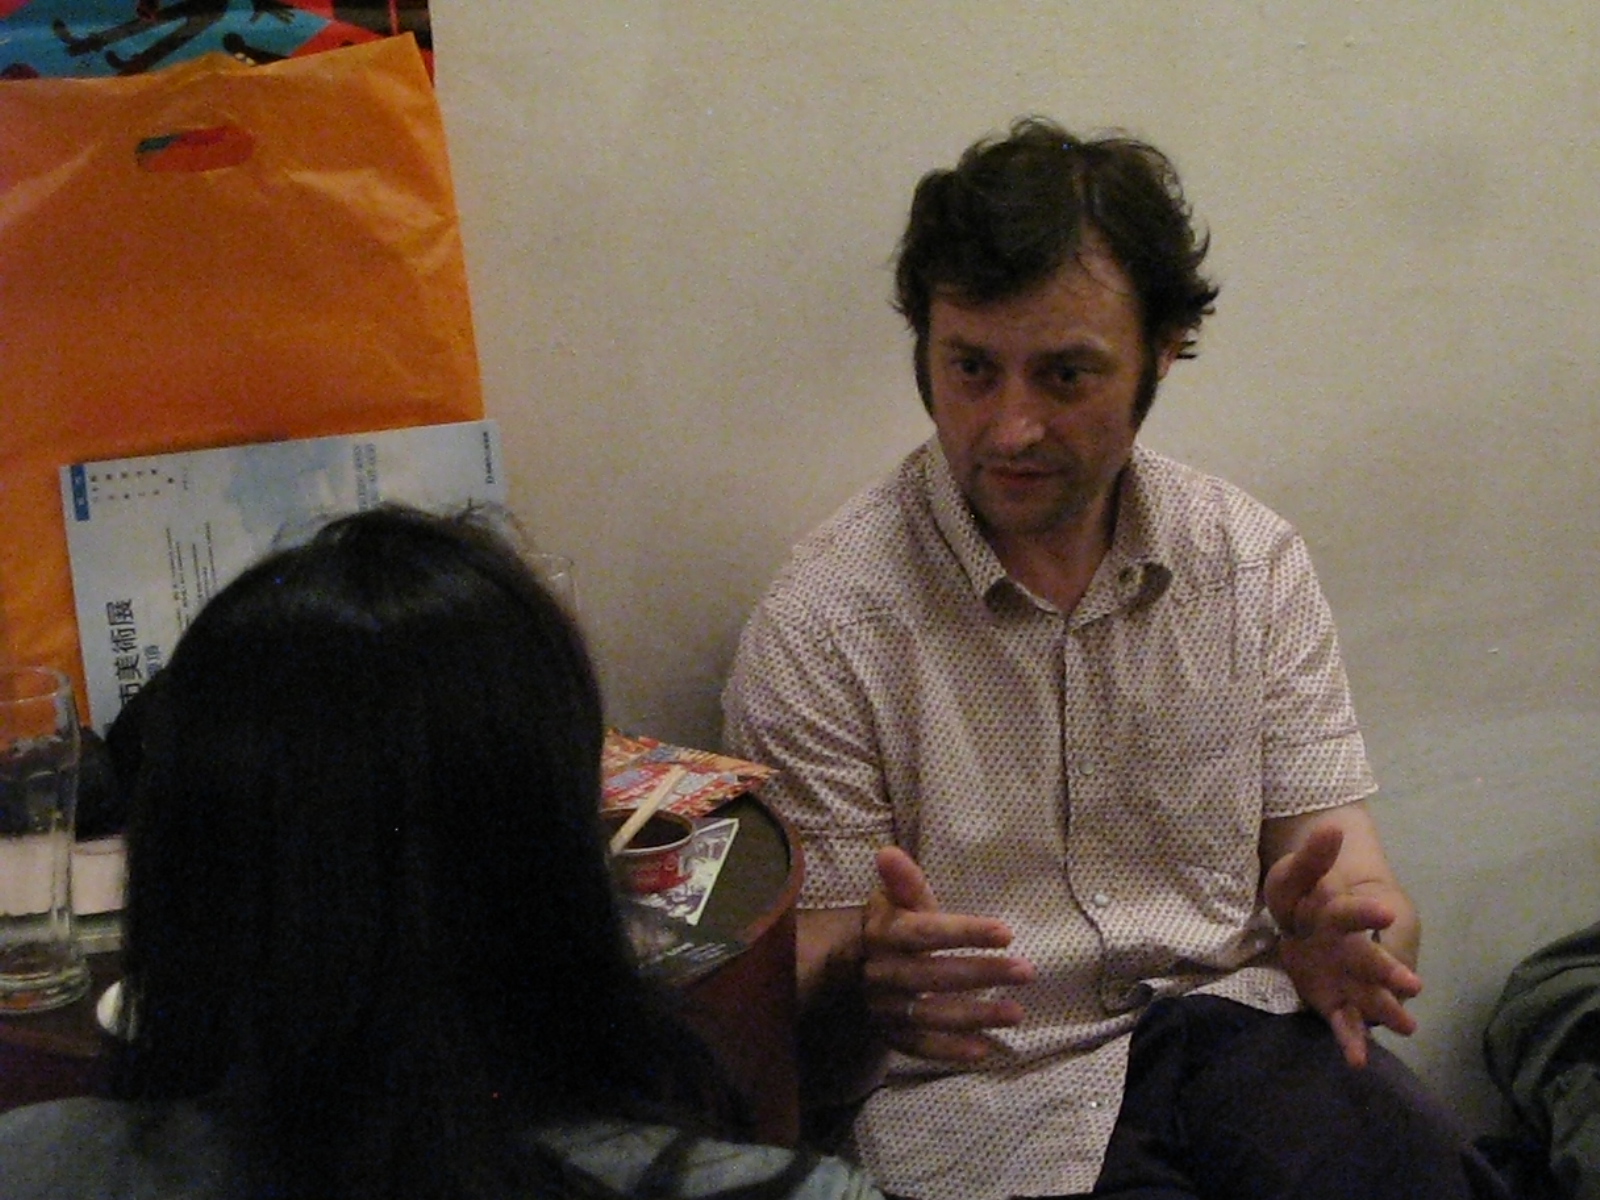 Sean Roe in conversation. Photograph by Michael Lambe